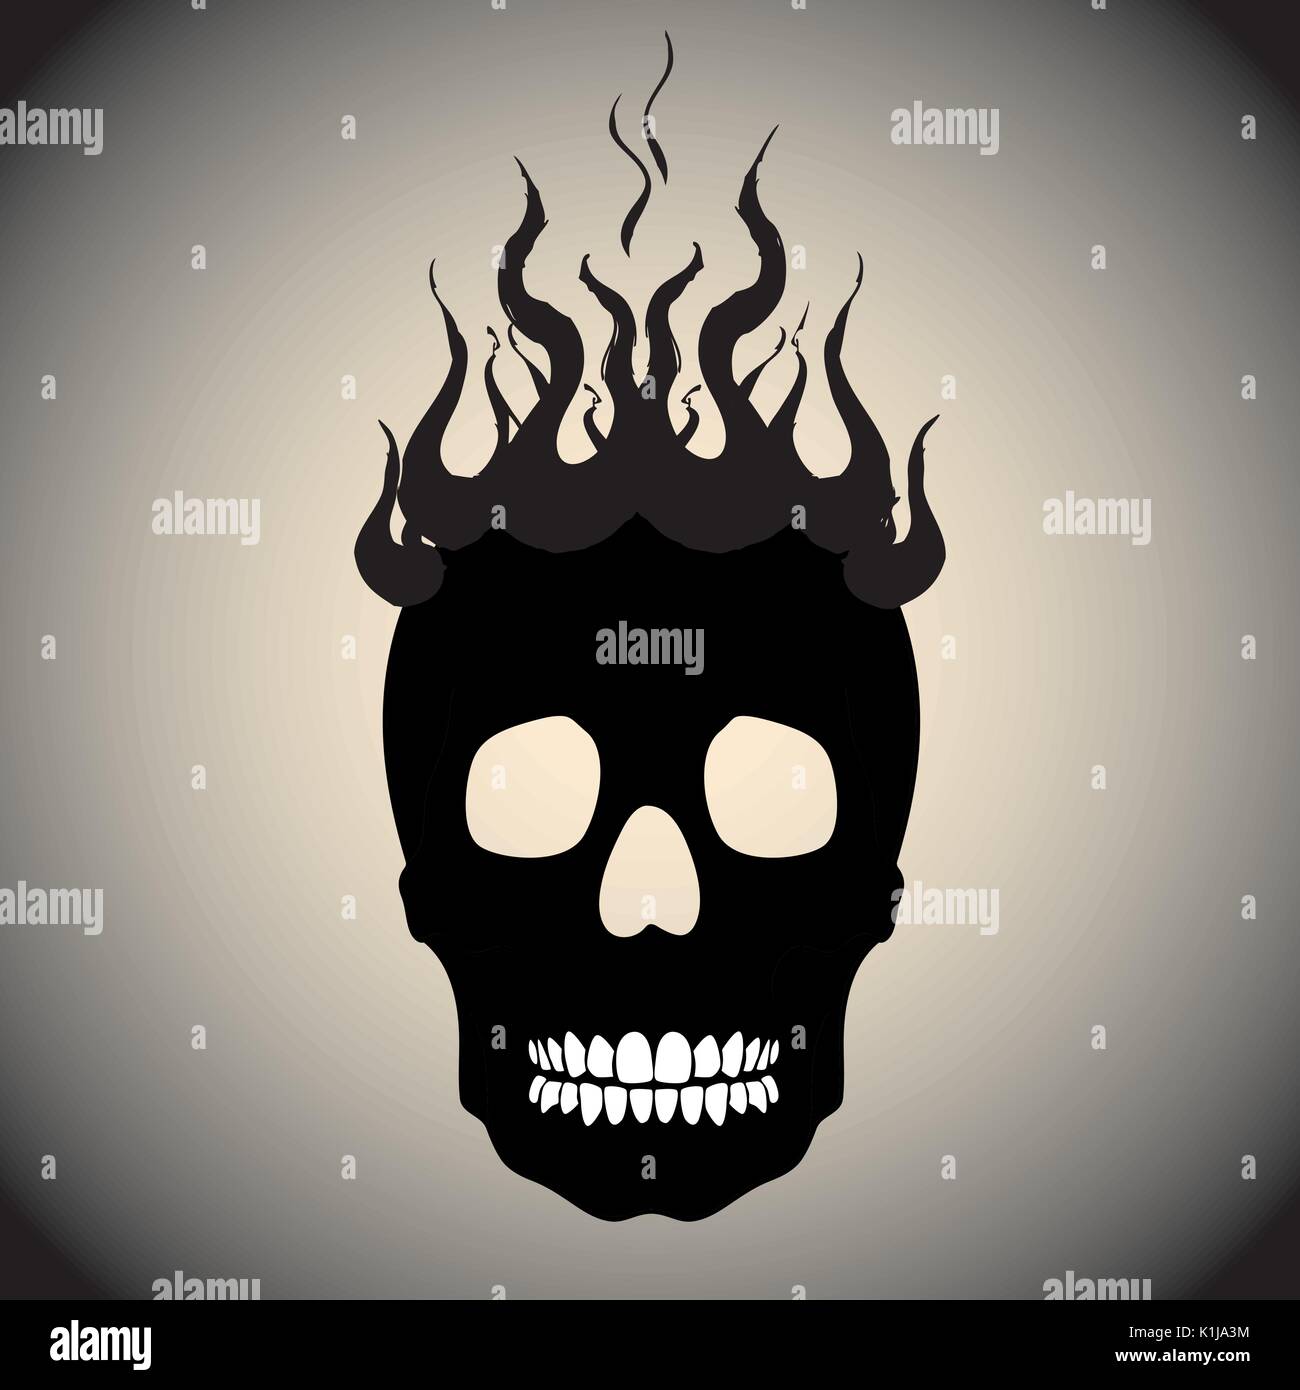 Premium Vector  Vintage black and white stylized flame or fire isolated on  white background